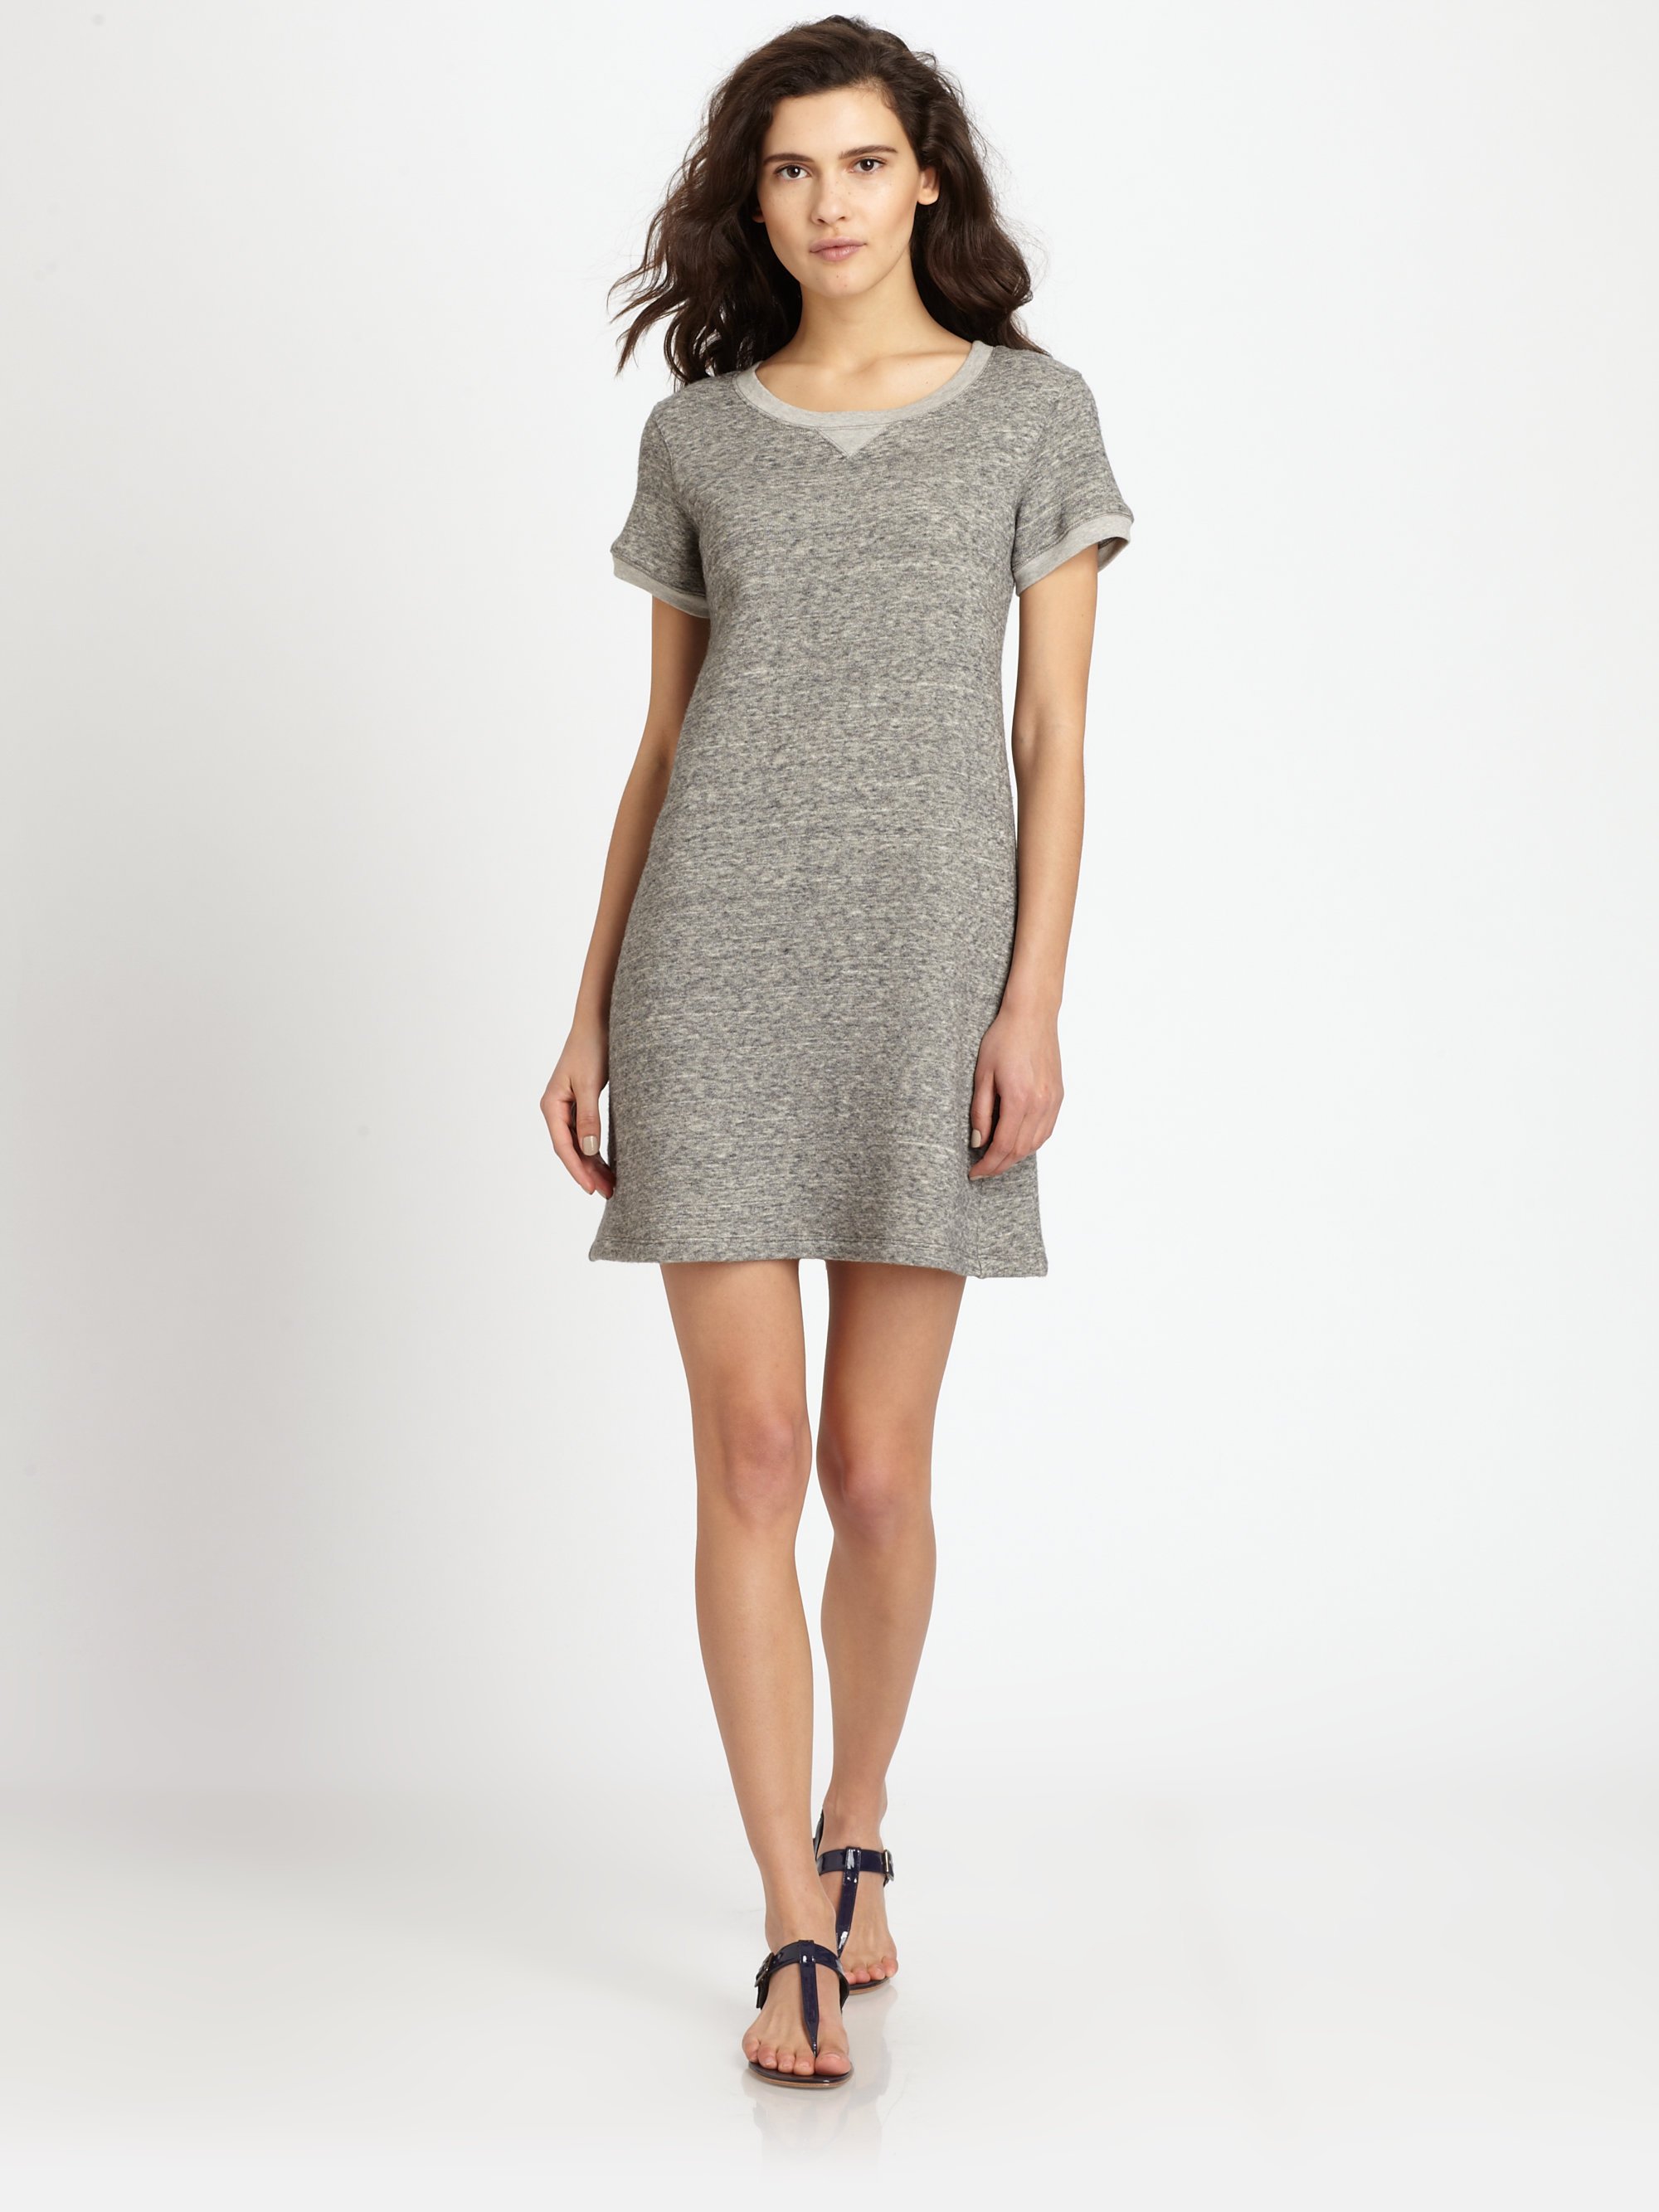 Lyst - Theory Teju Heathered Dress in Gray